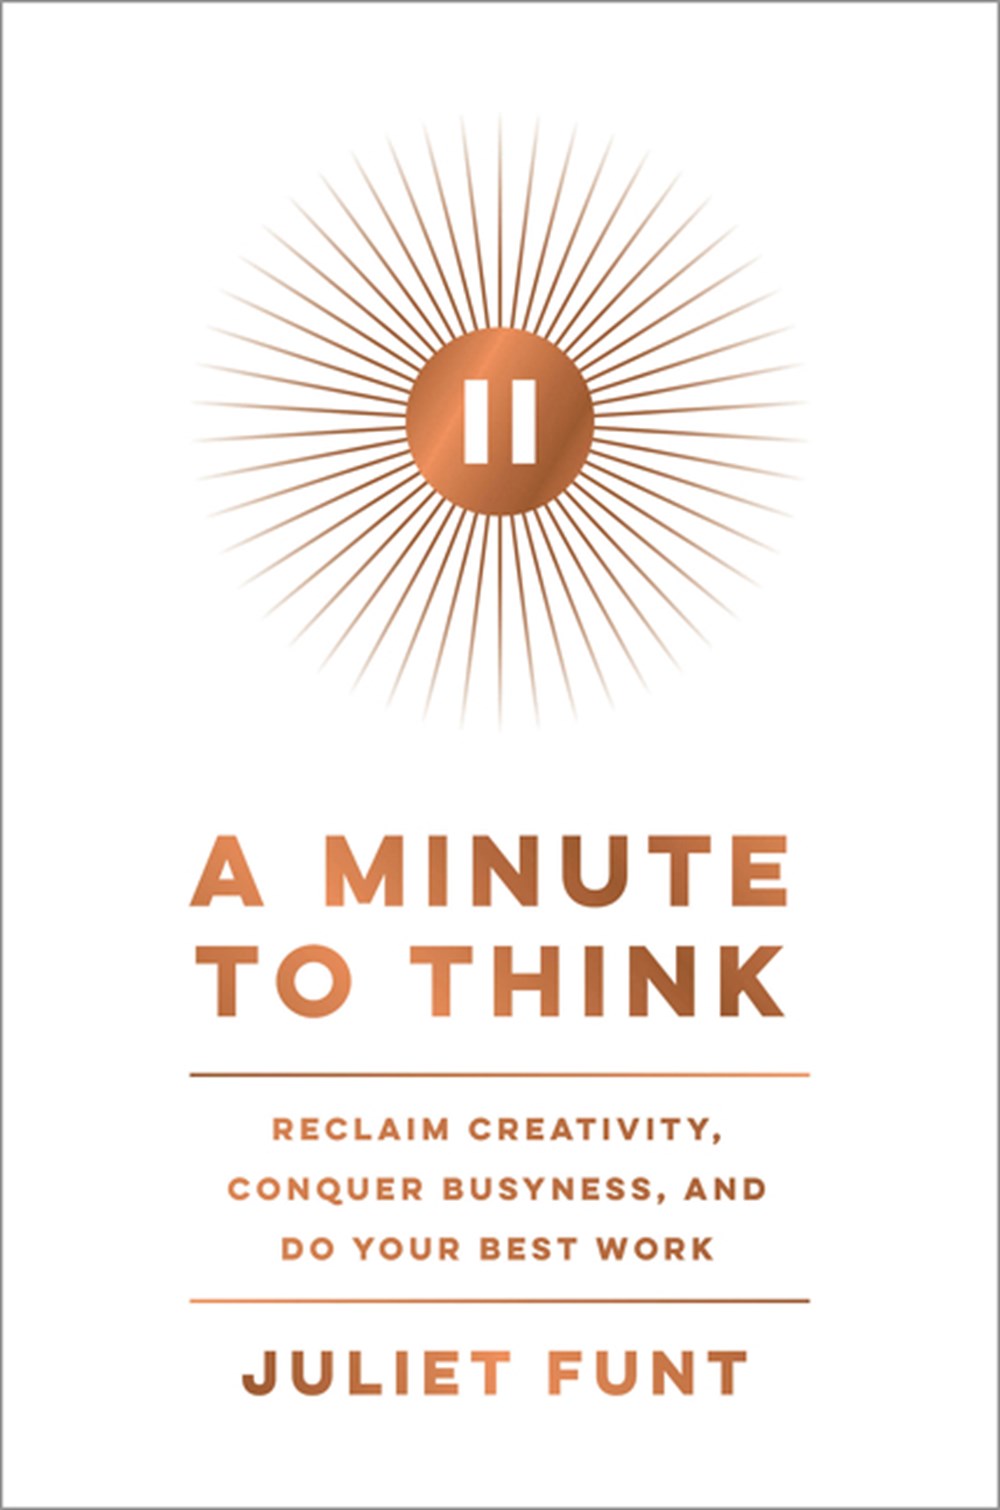 Minute to Think Reclaim Creativity, Conquer Busyness, and Do Your Best Work